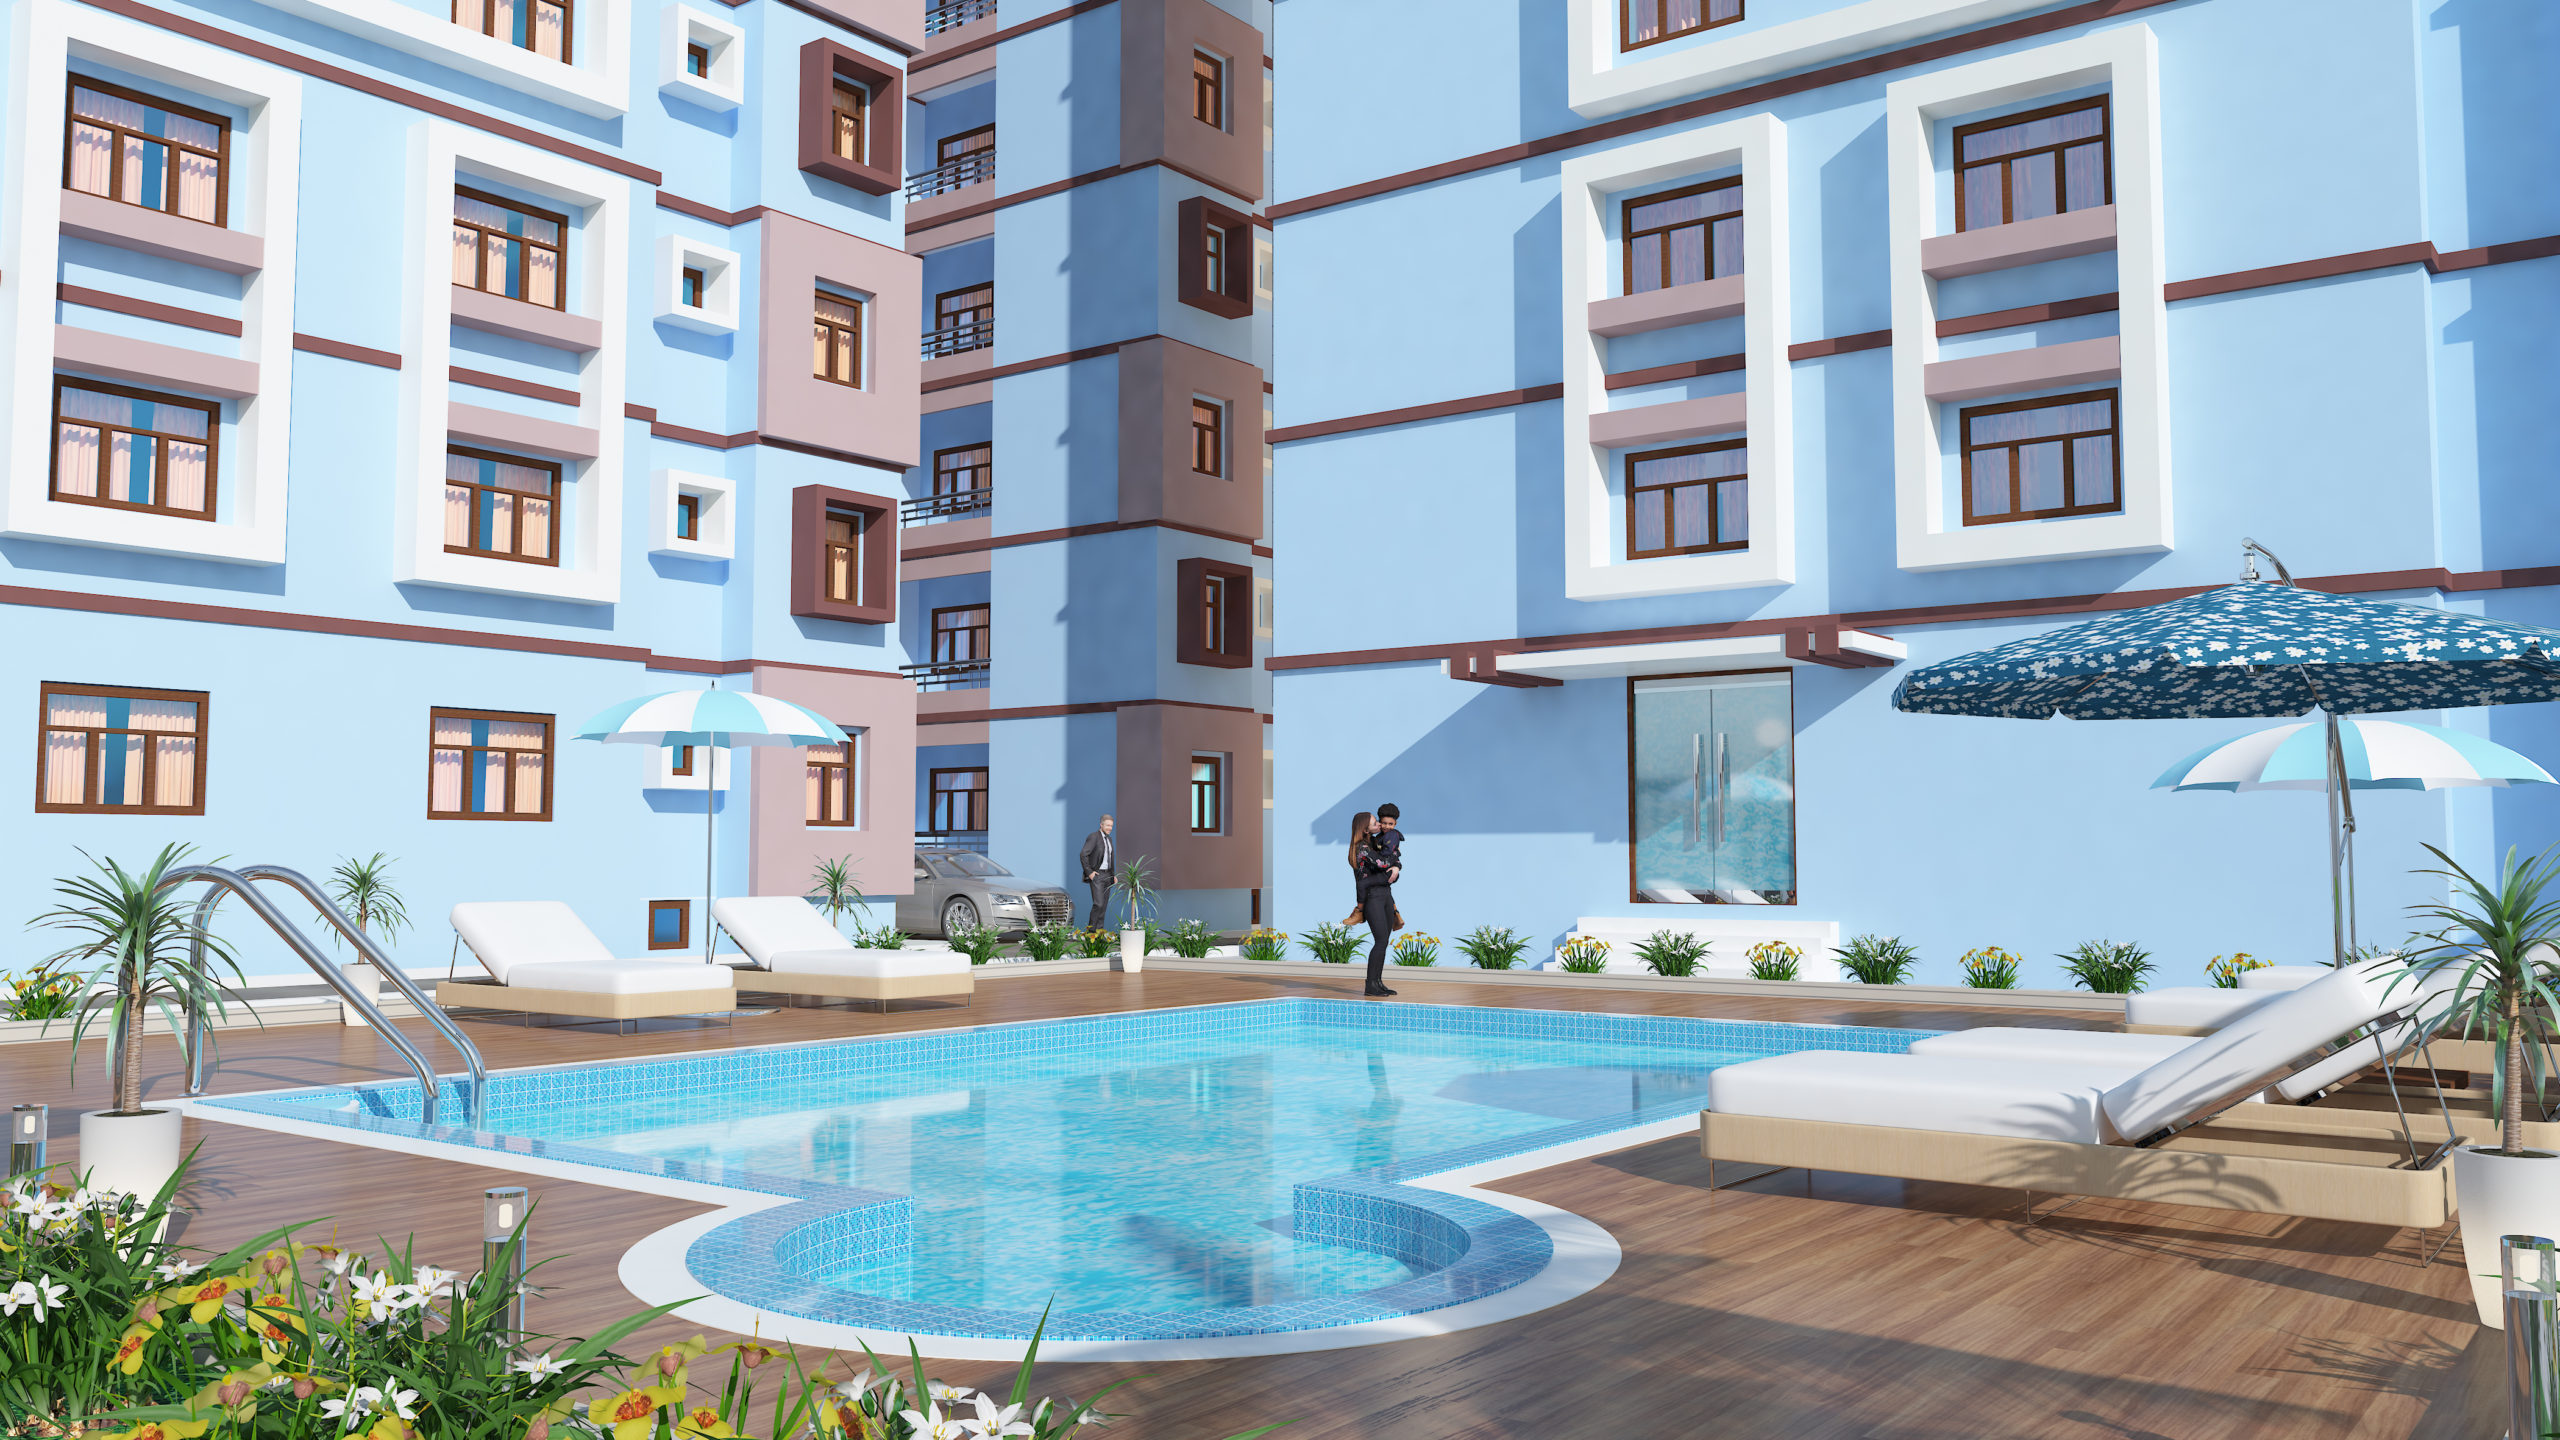 3D Architectural Design Rendering of Township Swimming Pool